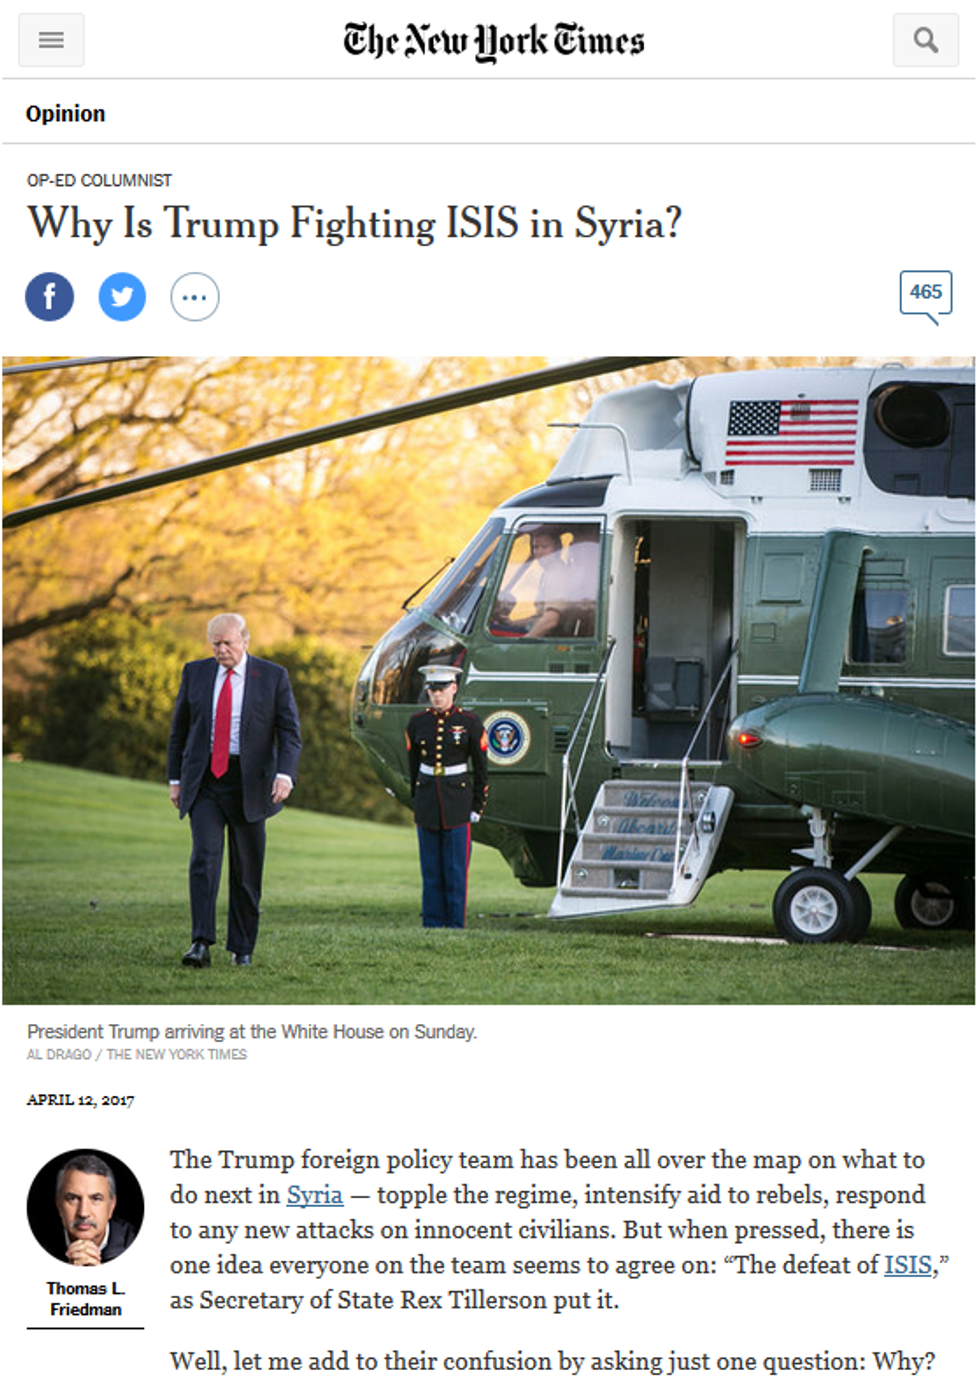 NYT: Why Is Trump Fighting ISIS in Syria?